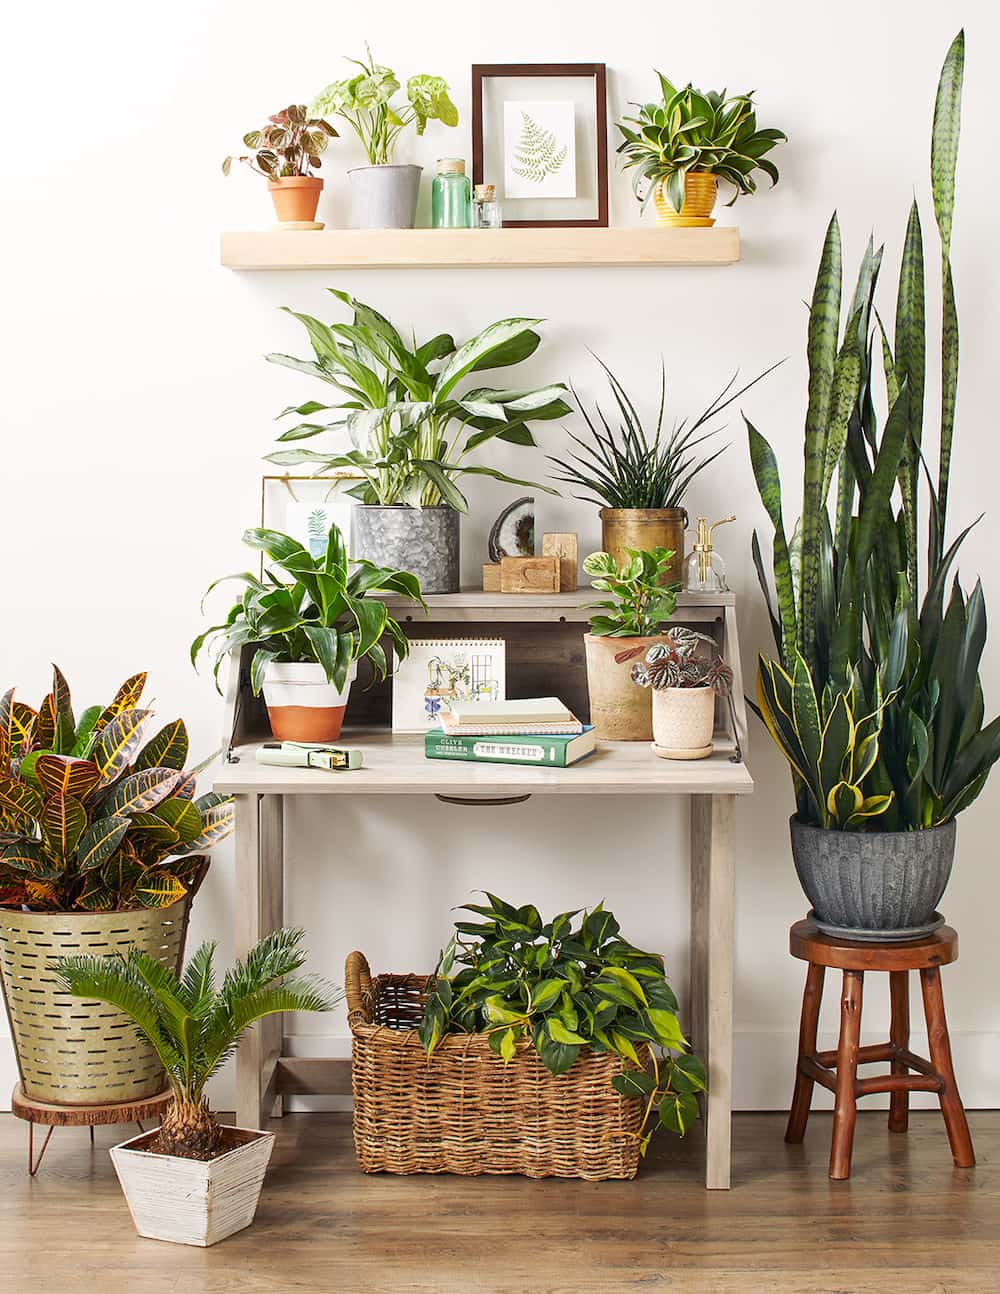 Where to buy plants in Quezon City online to make your life better